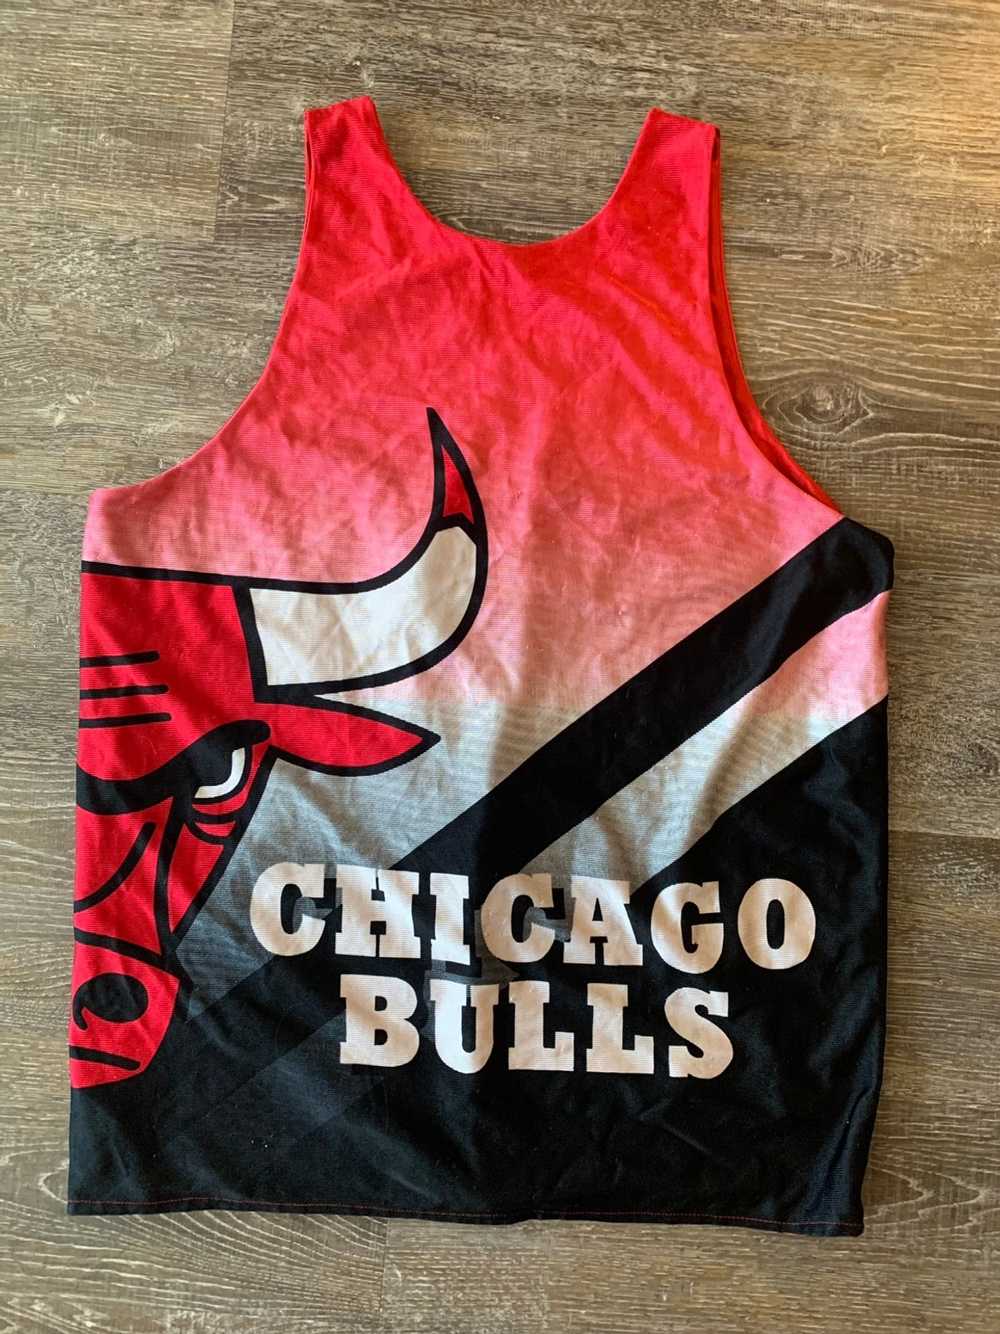 Chicago Bulls @starterofficial with that retro feel to it • Sold